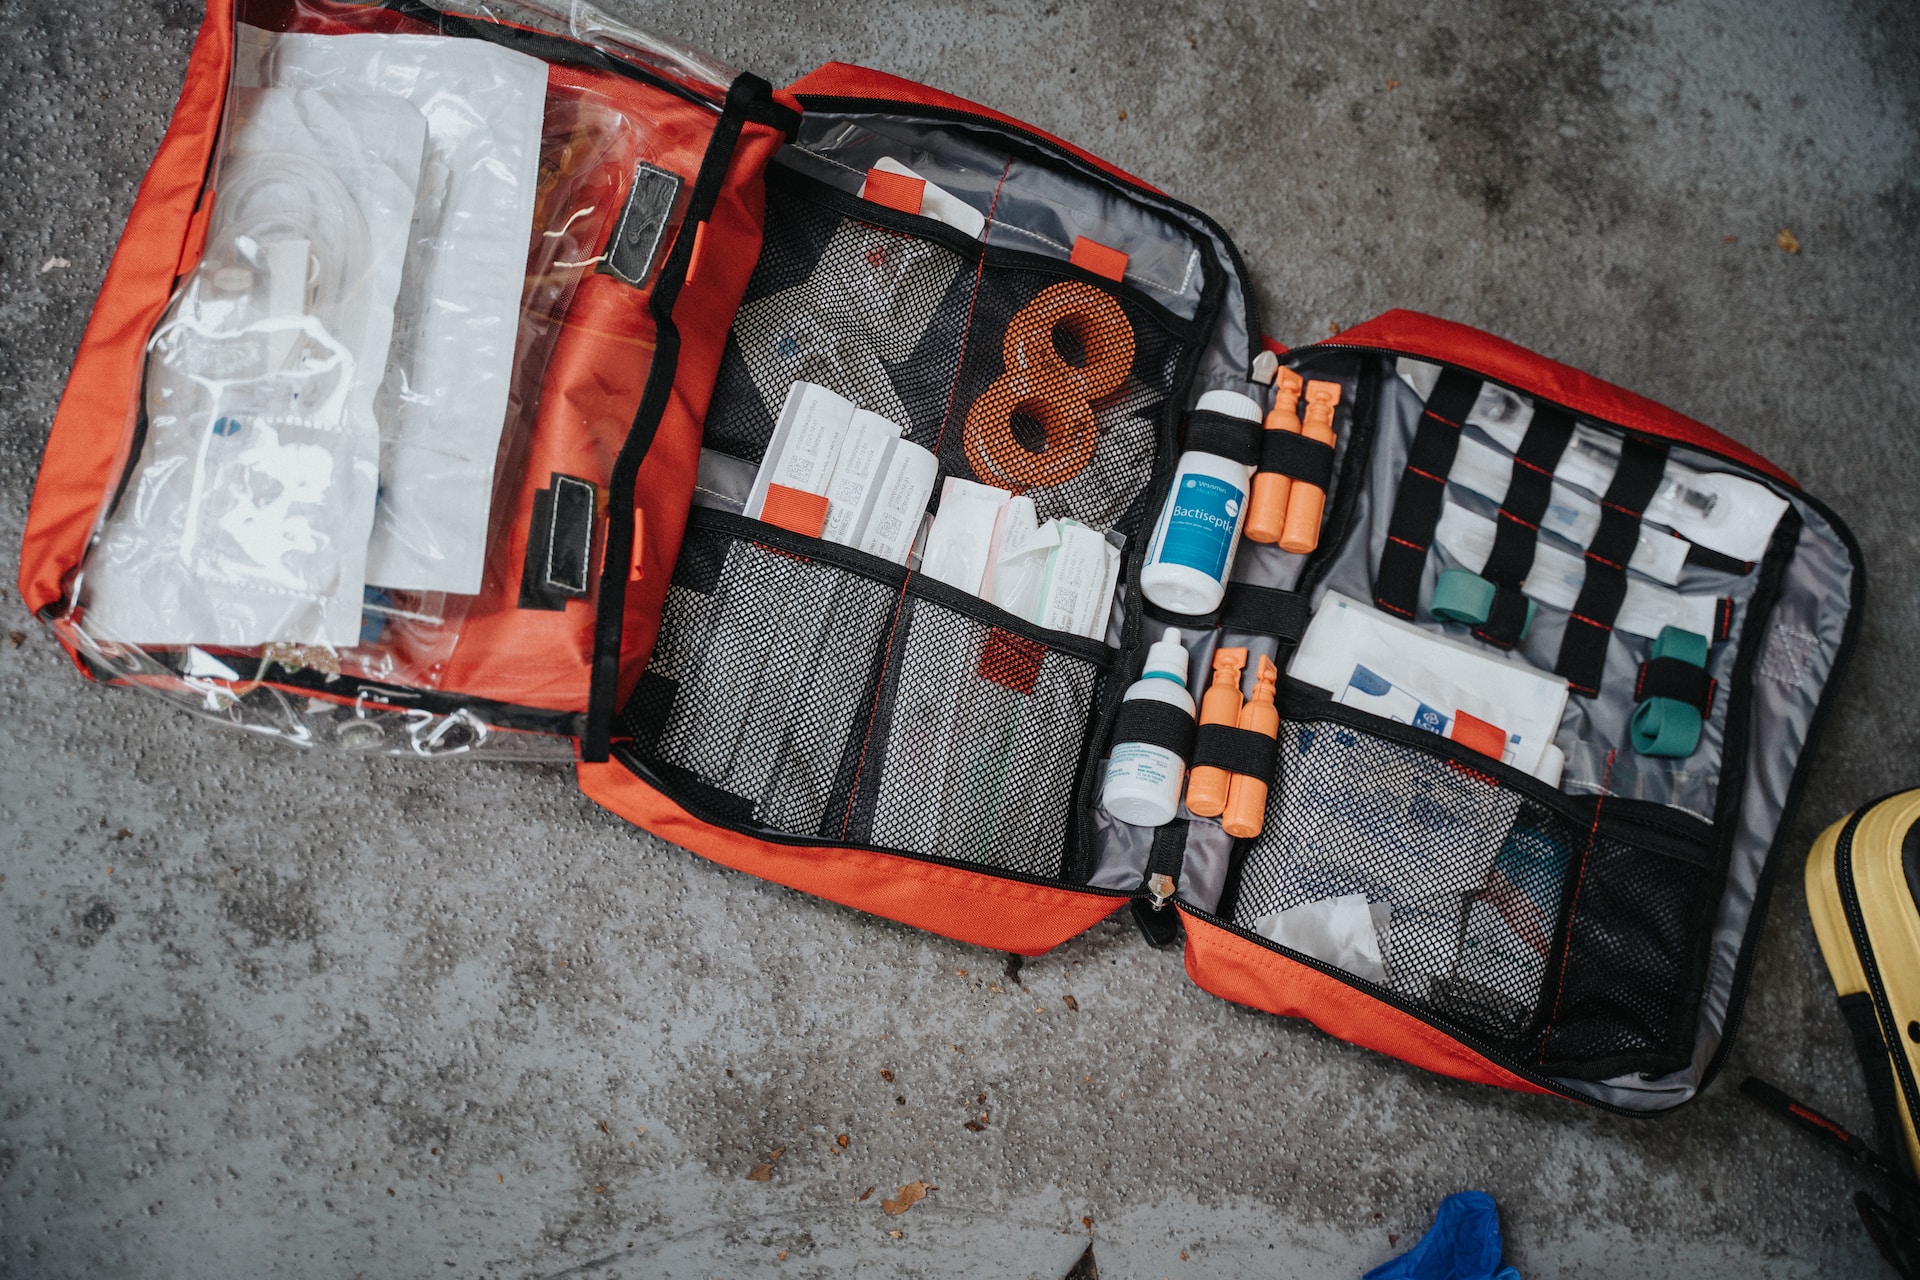 An open medical first aid kit